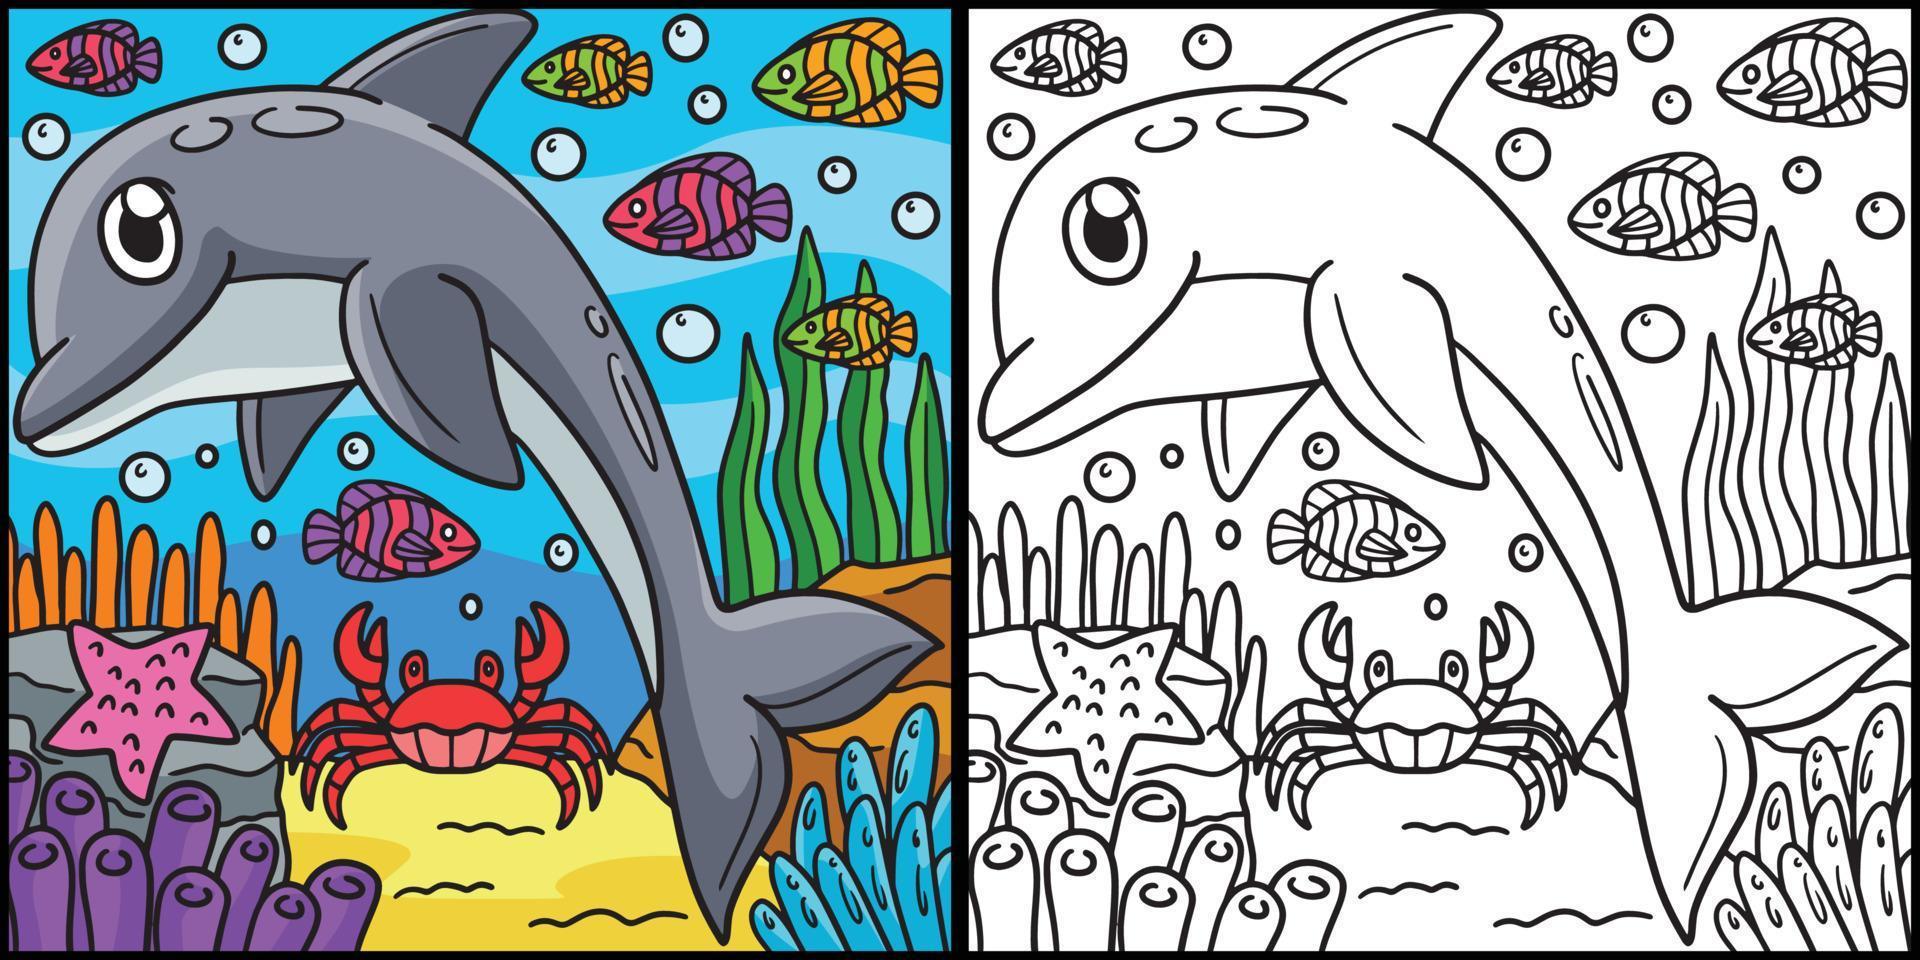 Dolphin Coloring Page Colored Illustration vector